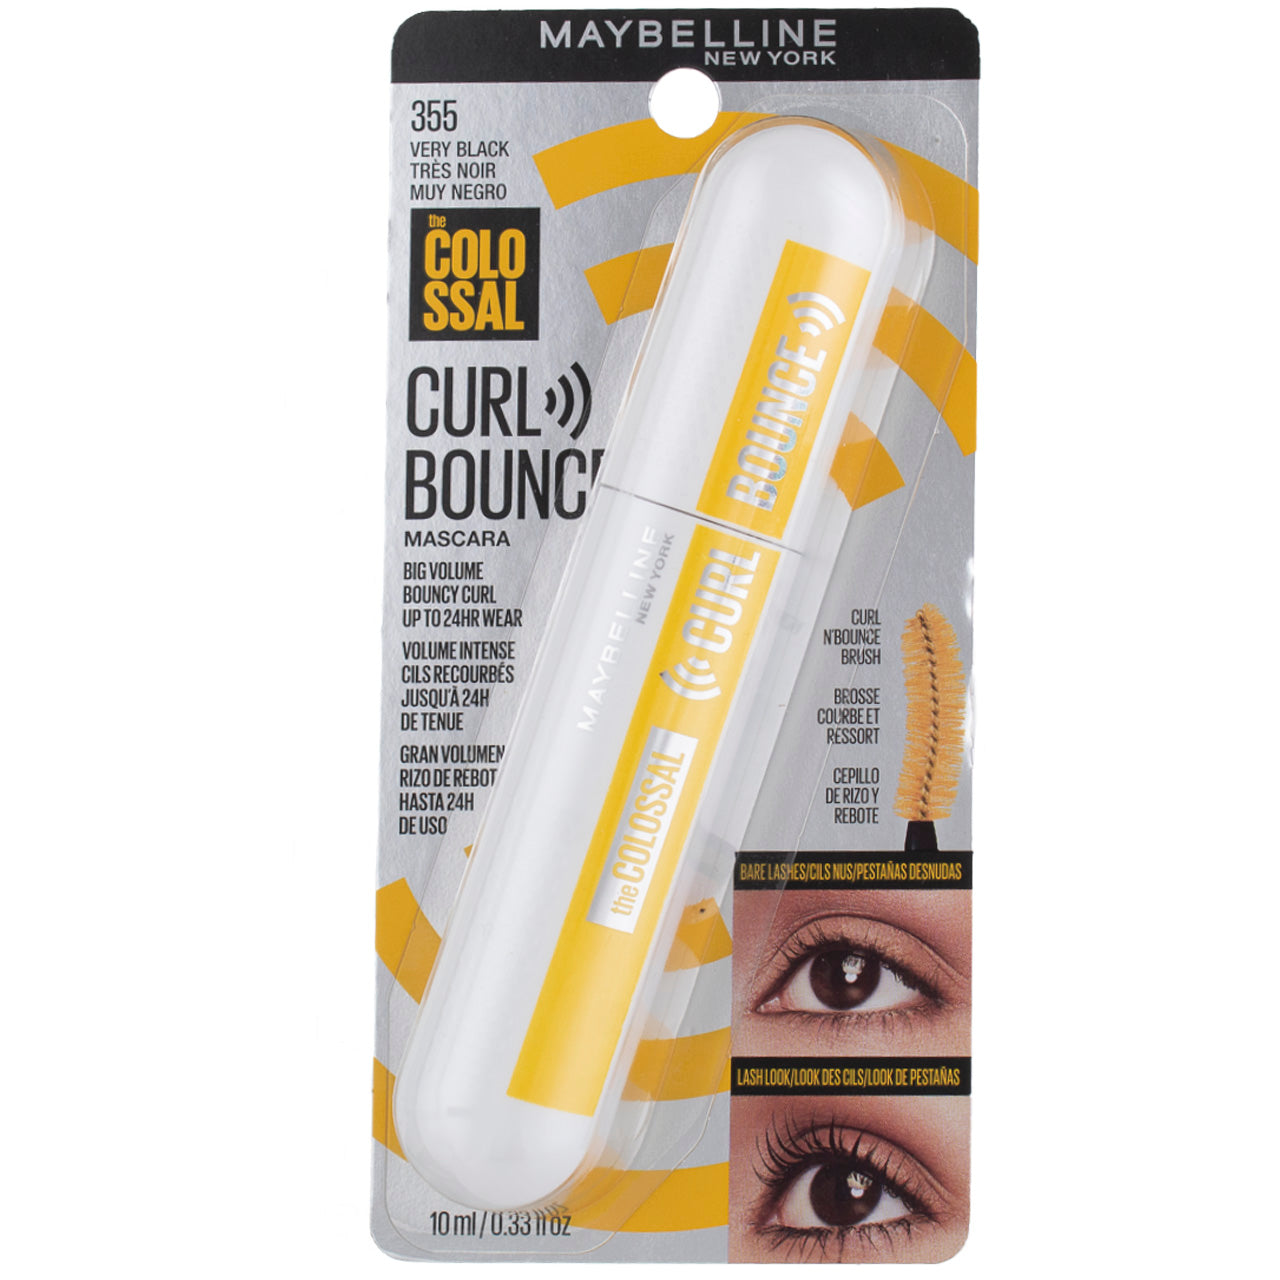 Bouncing Maybelline 355, Vitabox Curl – 0.33 Black Mascara, Colossal Very fl The